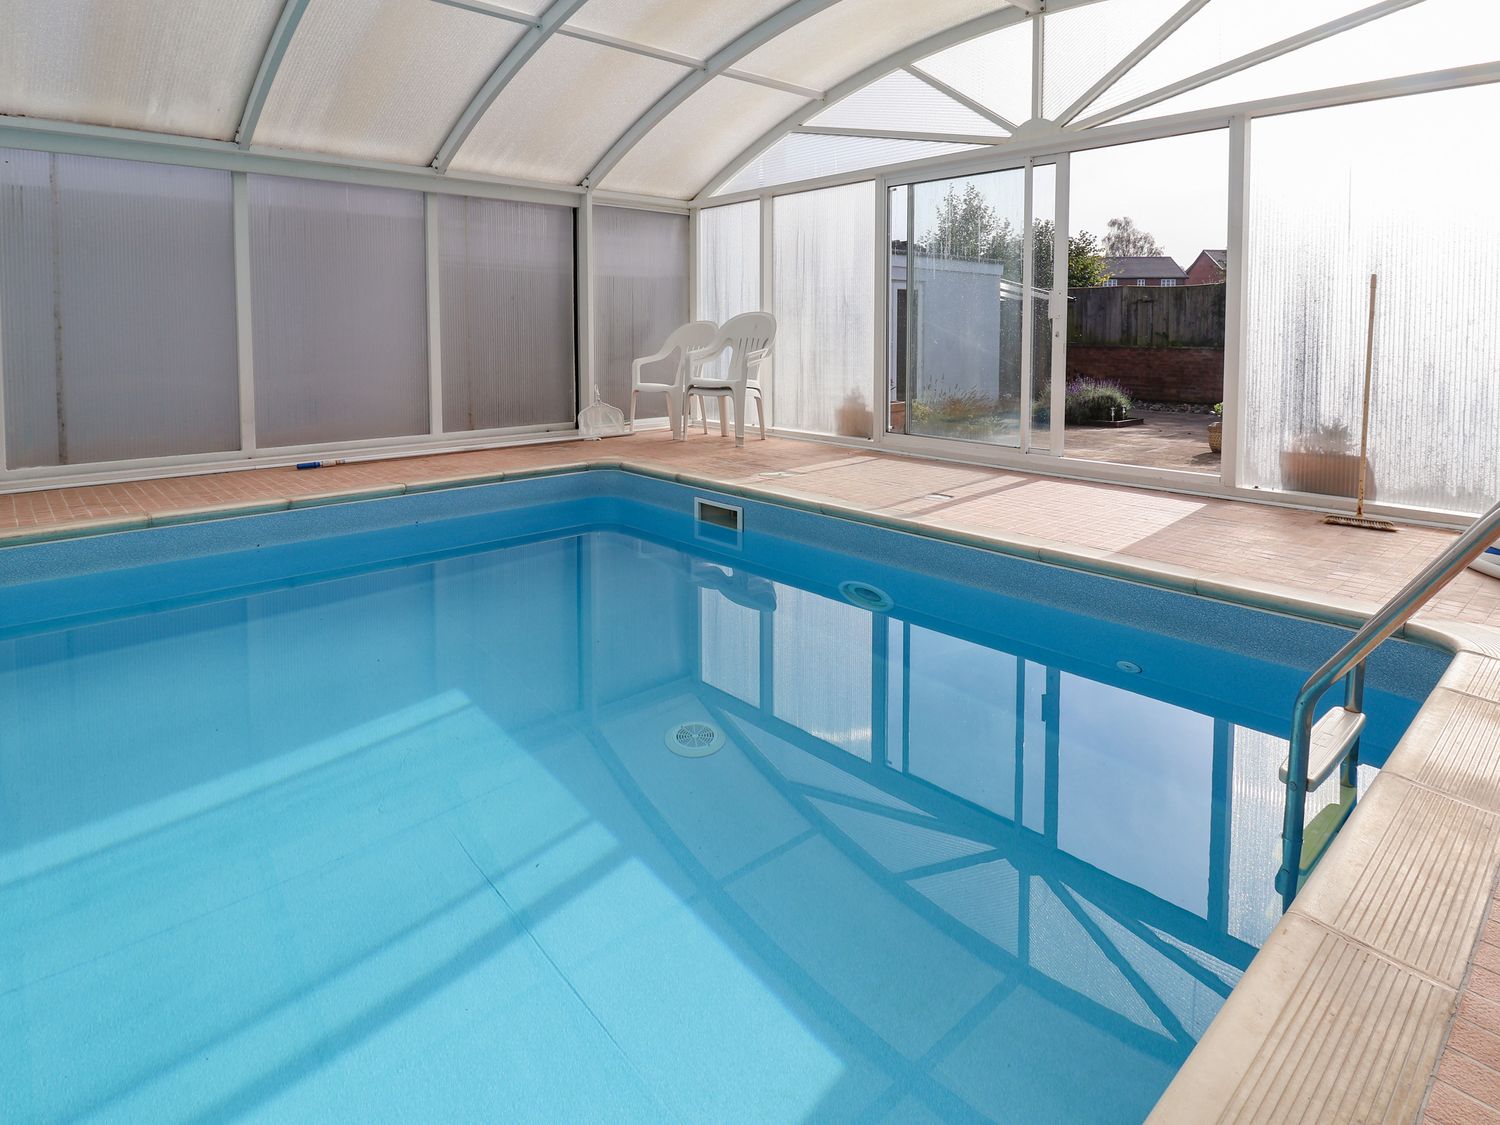 Bramble Lodge, in Cuddington, Cheshire. Single-storey base. Ideal for couples. Indoor swimming pool.